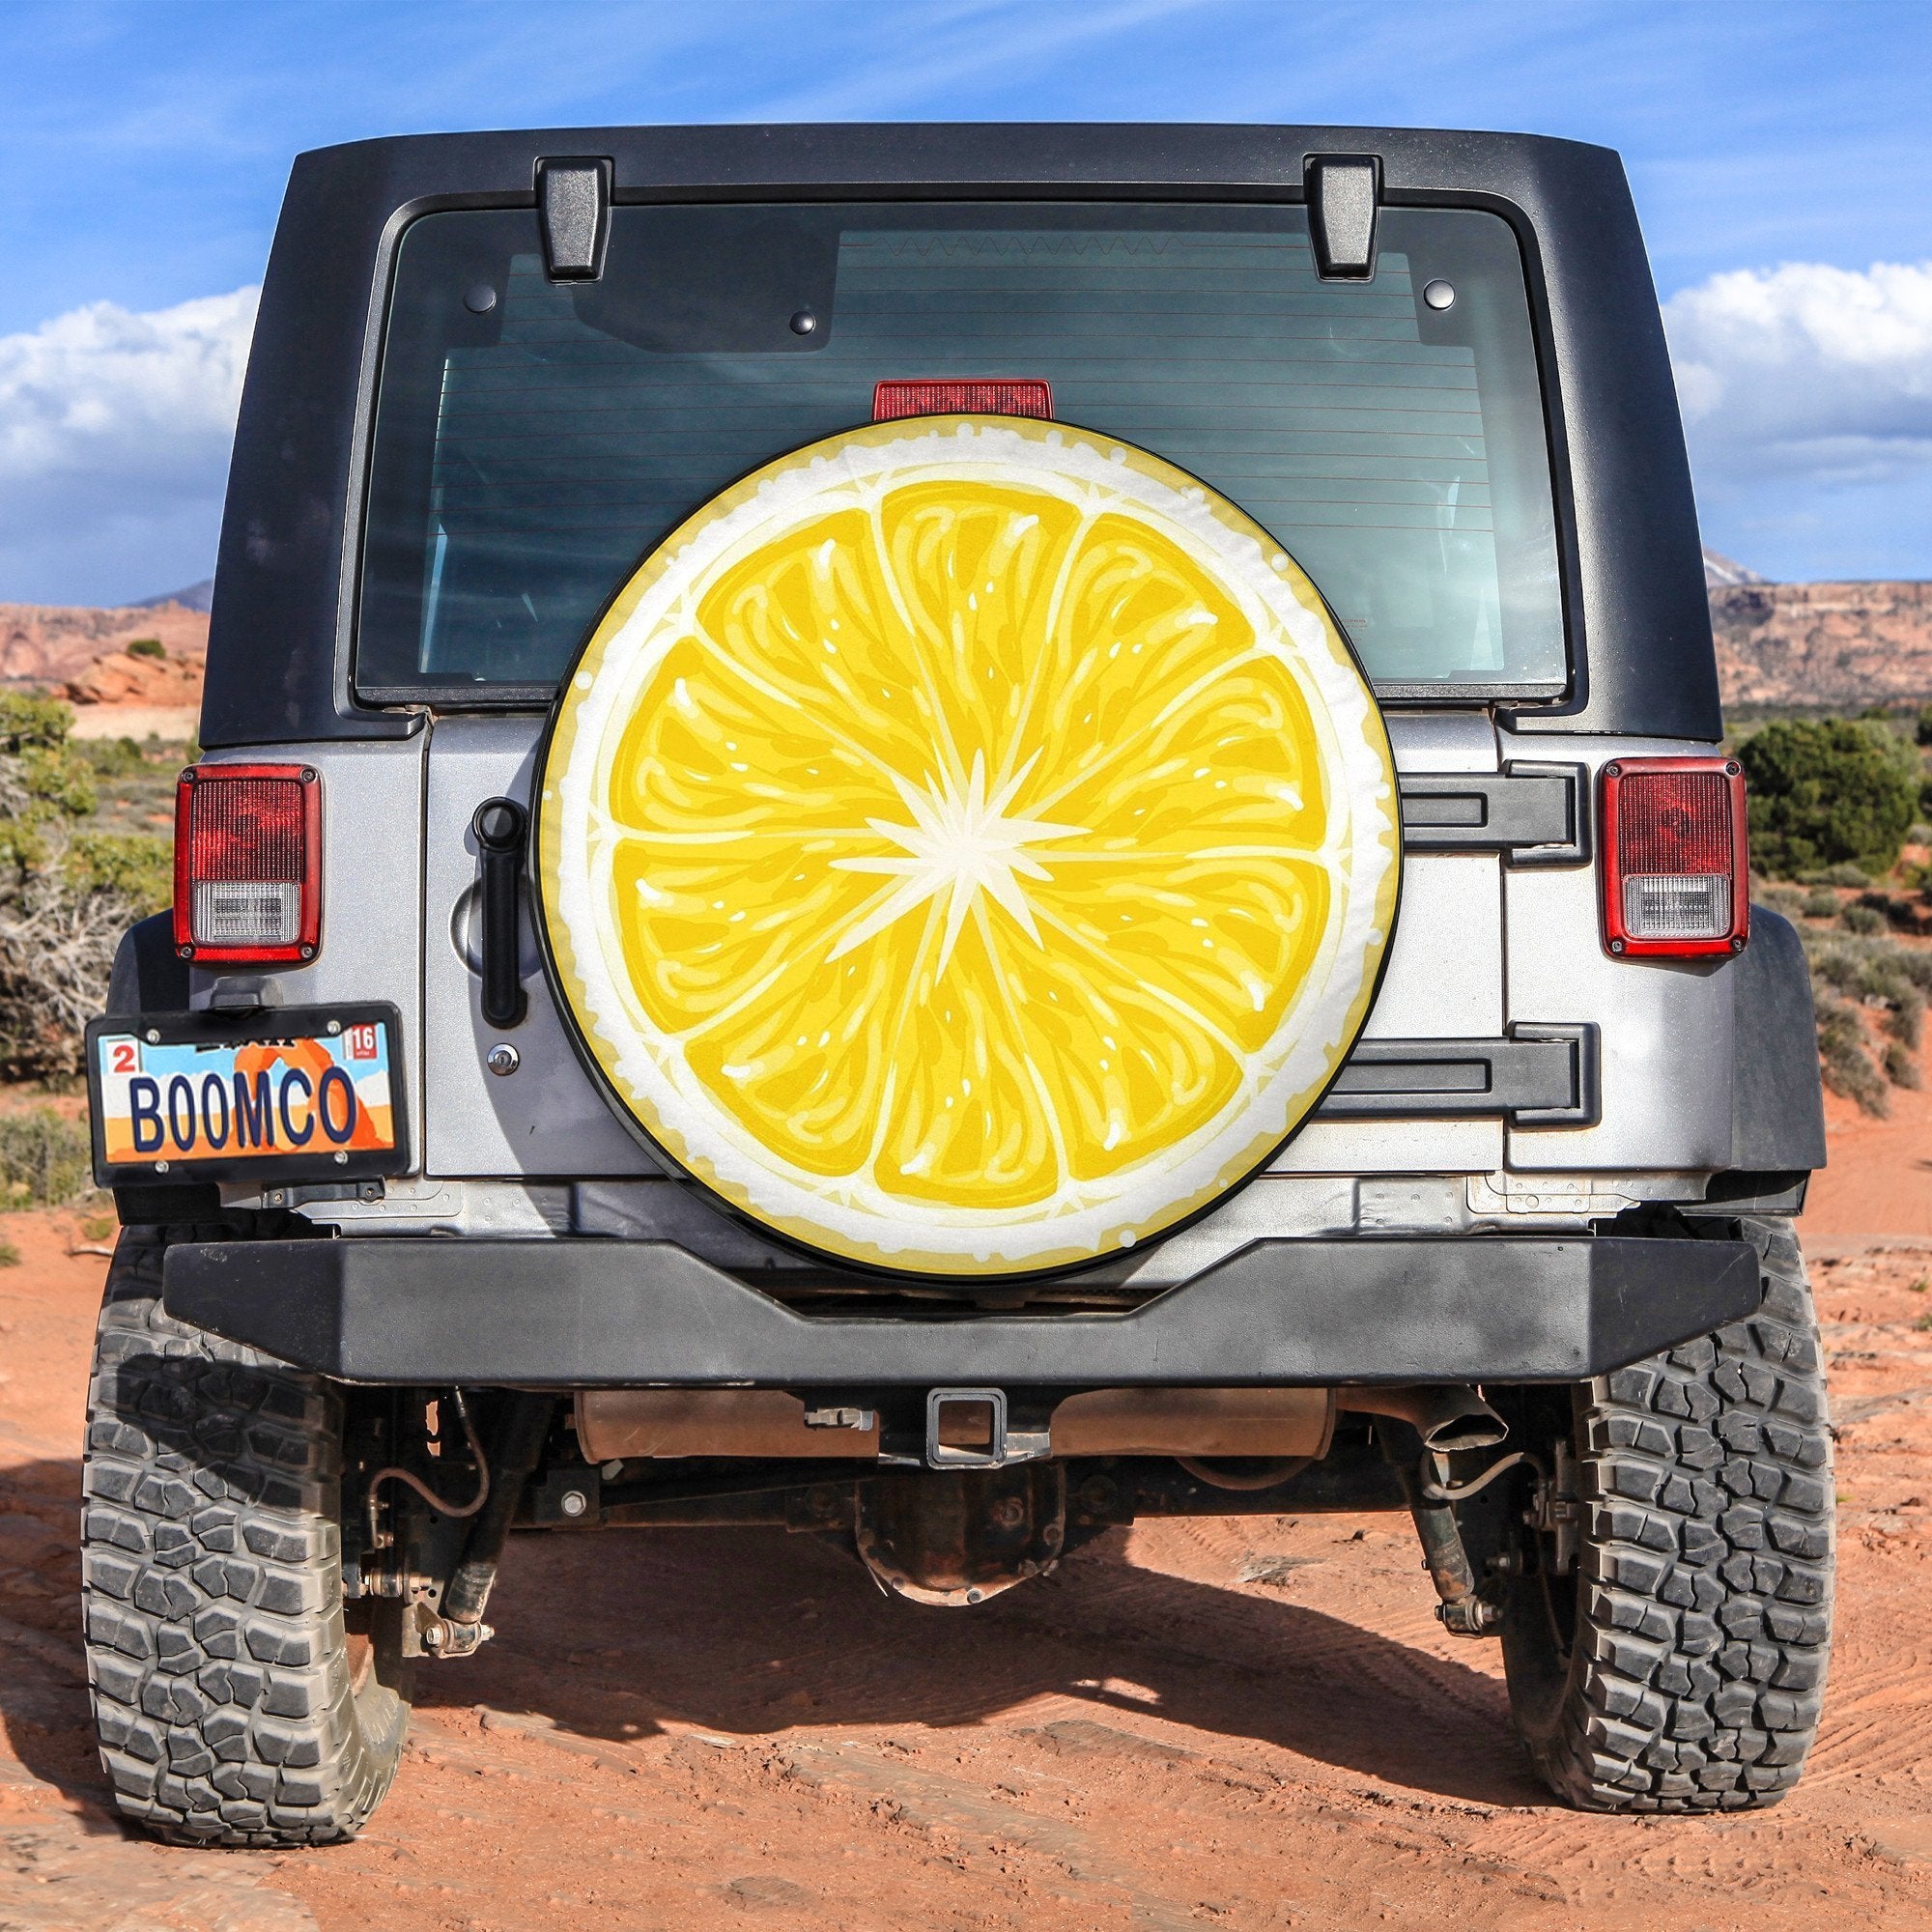 Juicy Lemon Spare Tire Cover Gift For Campers